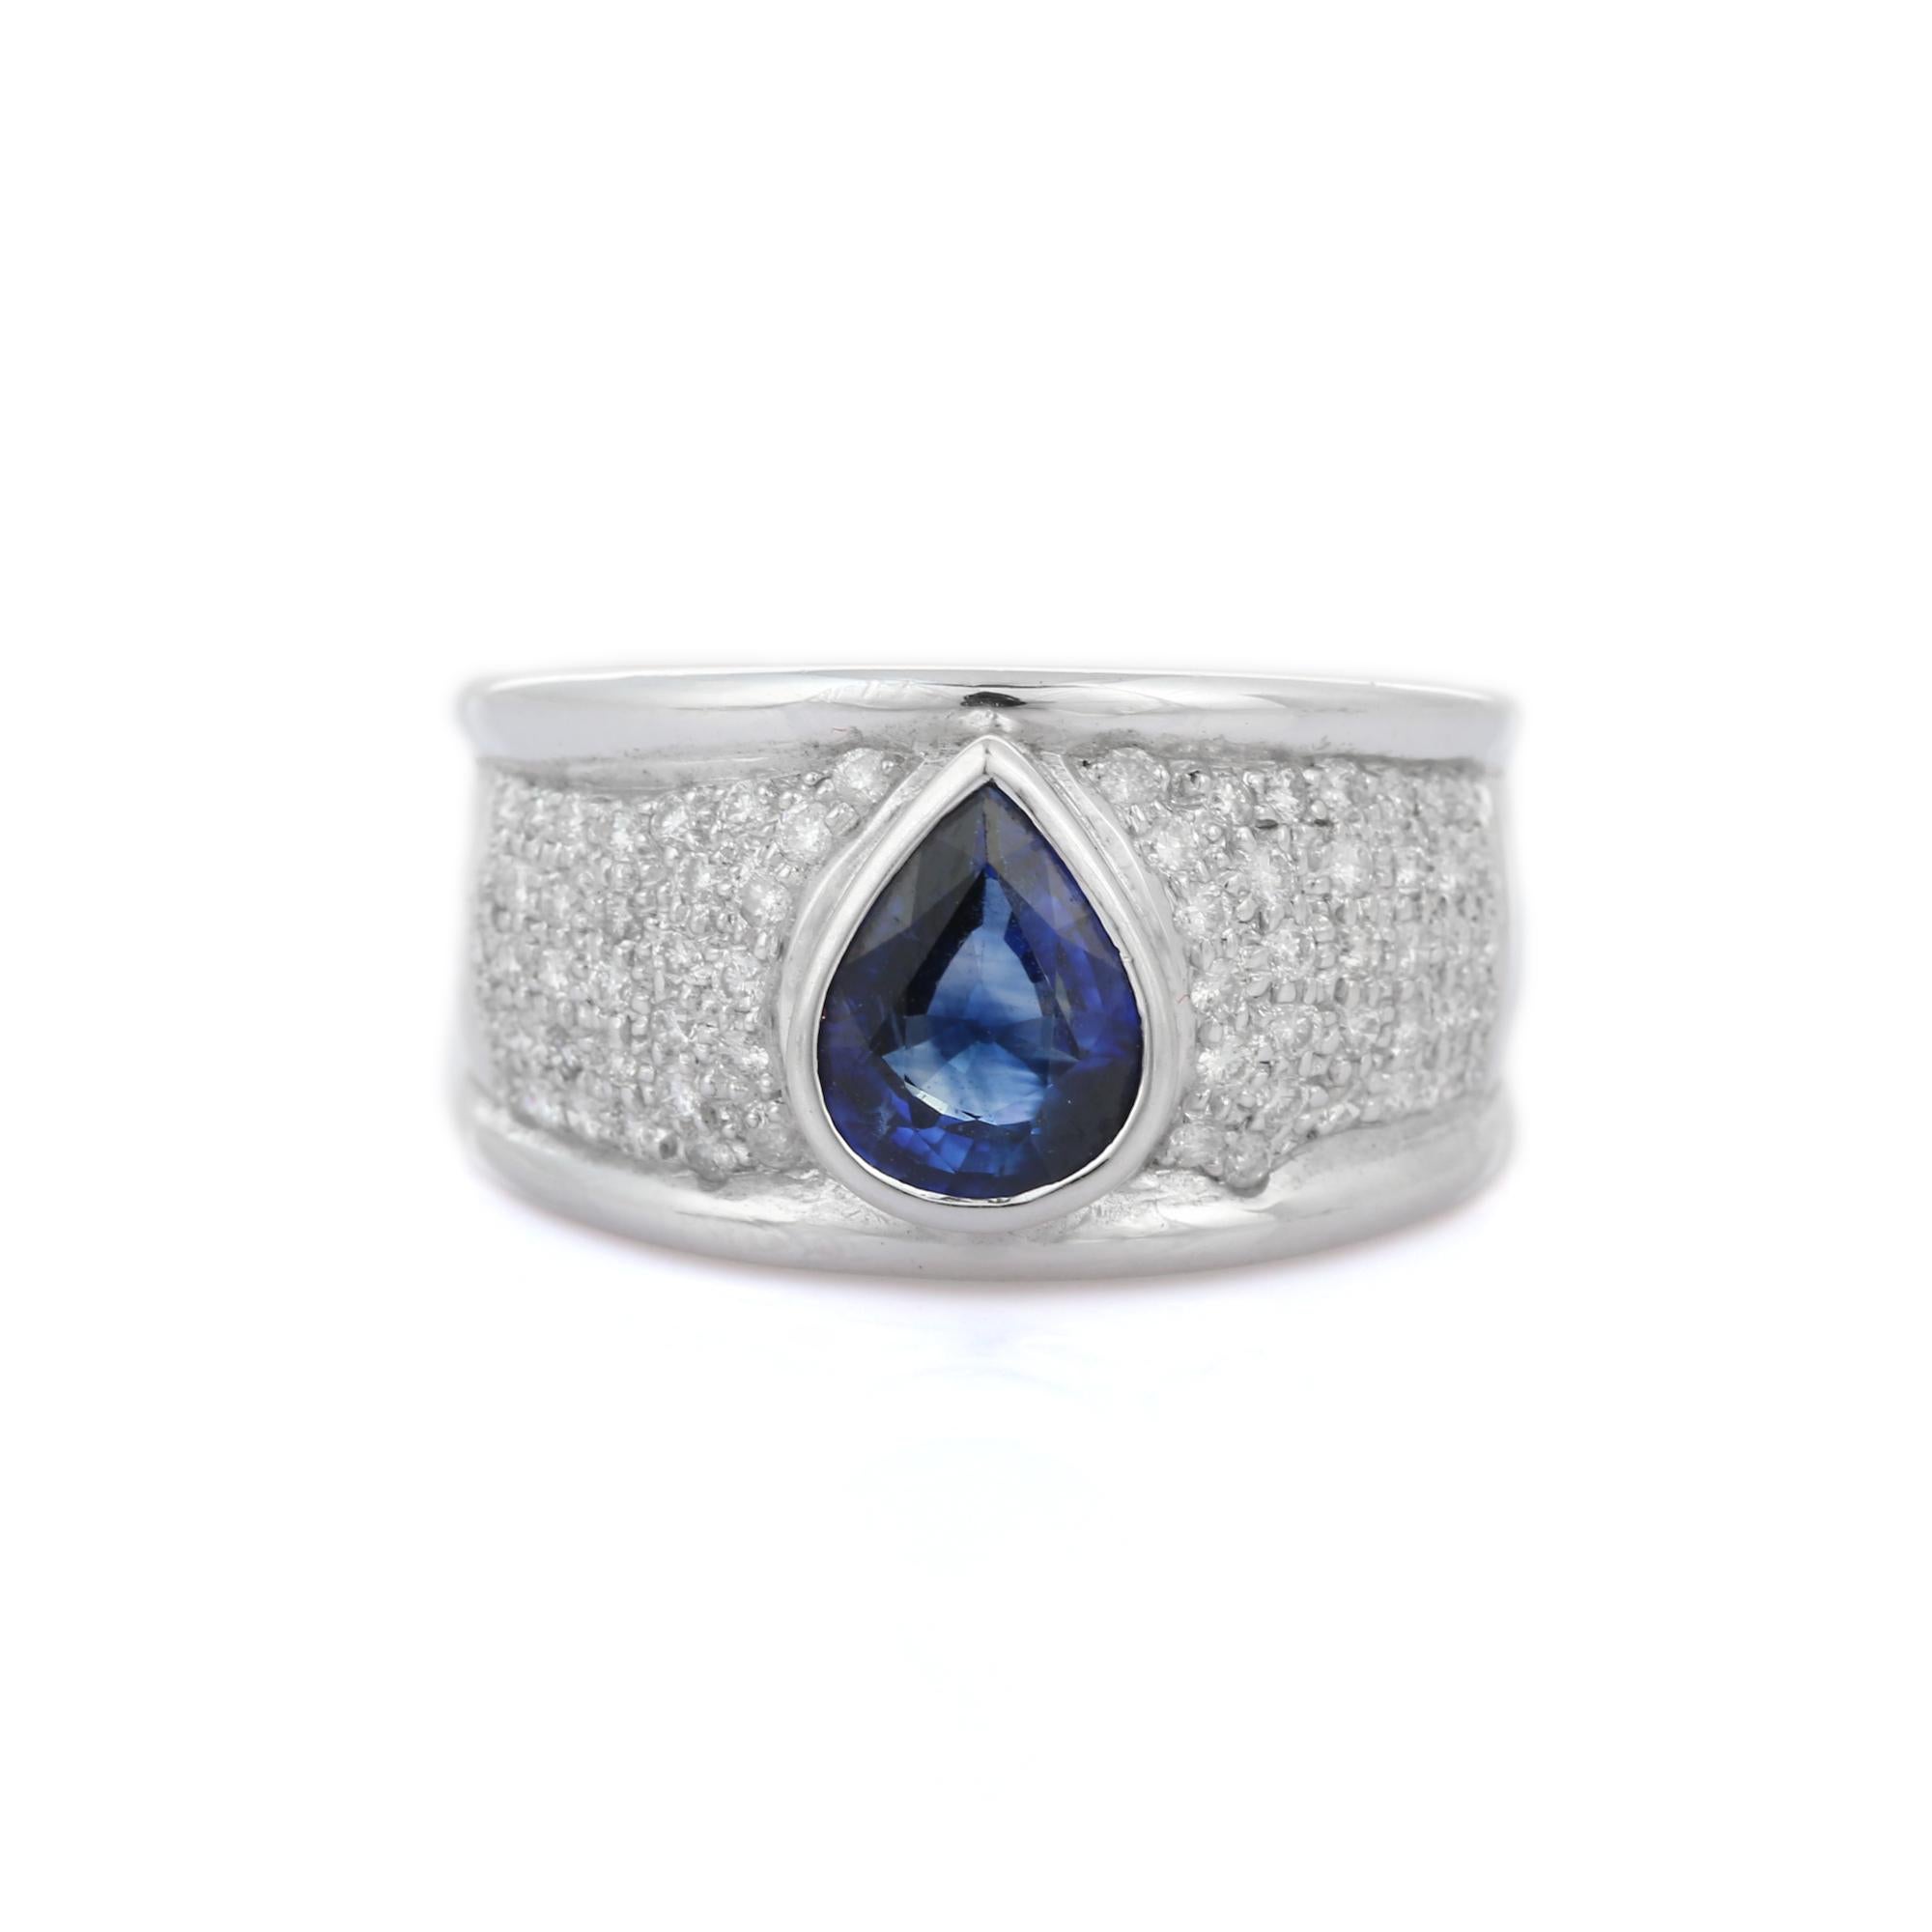 For Sale:  Glamarous 2.1 Ct Blue Sapphire Cocktail Ring in 18K White Gold with Diamonds 2